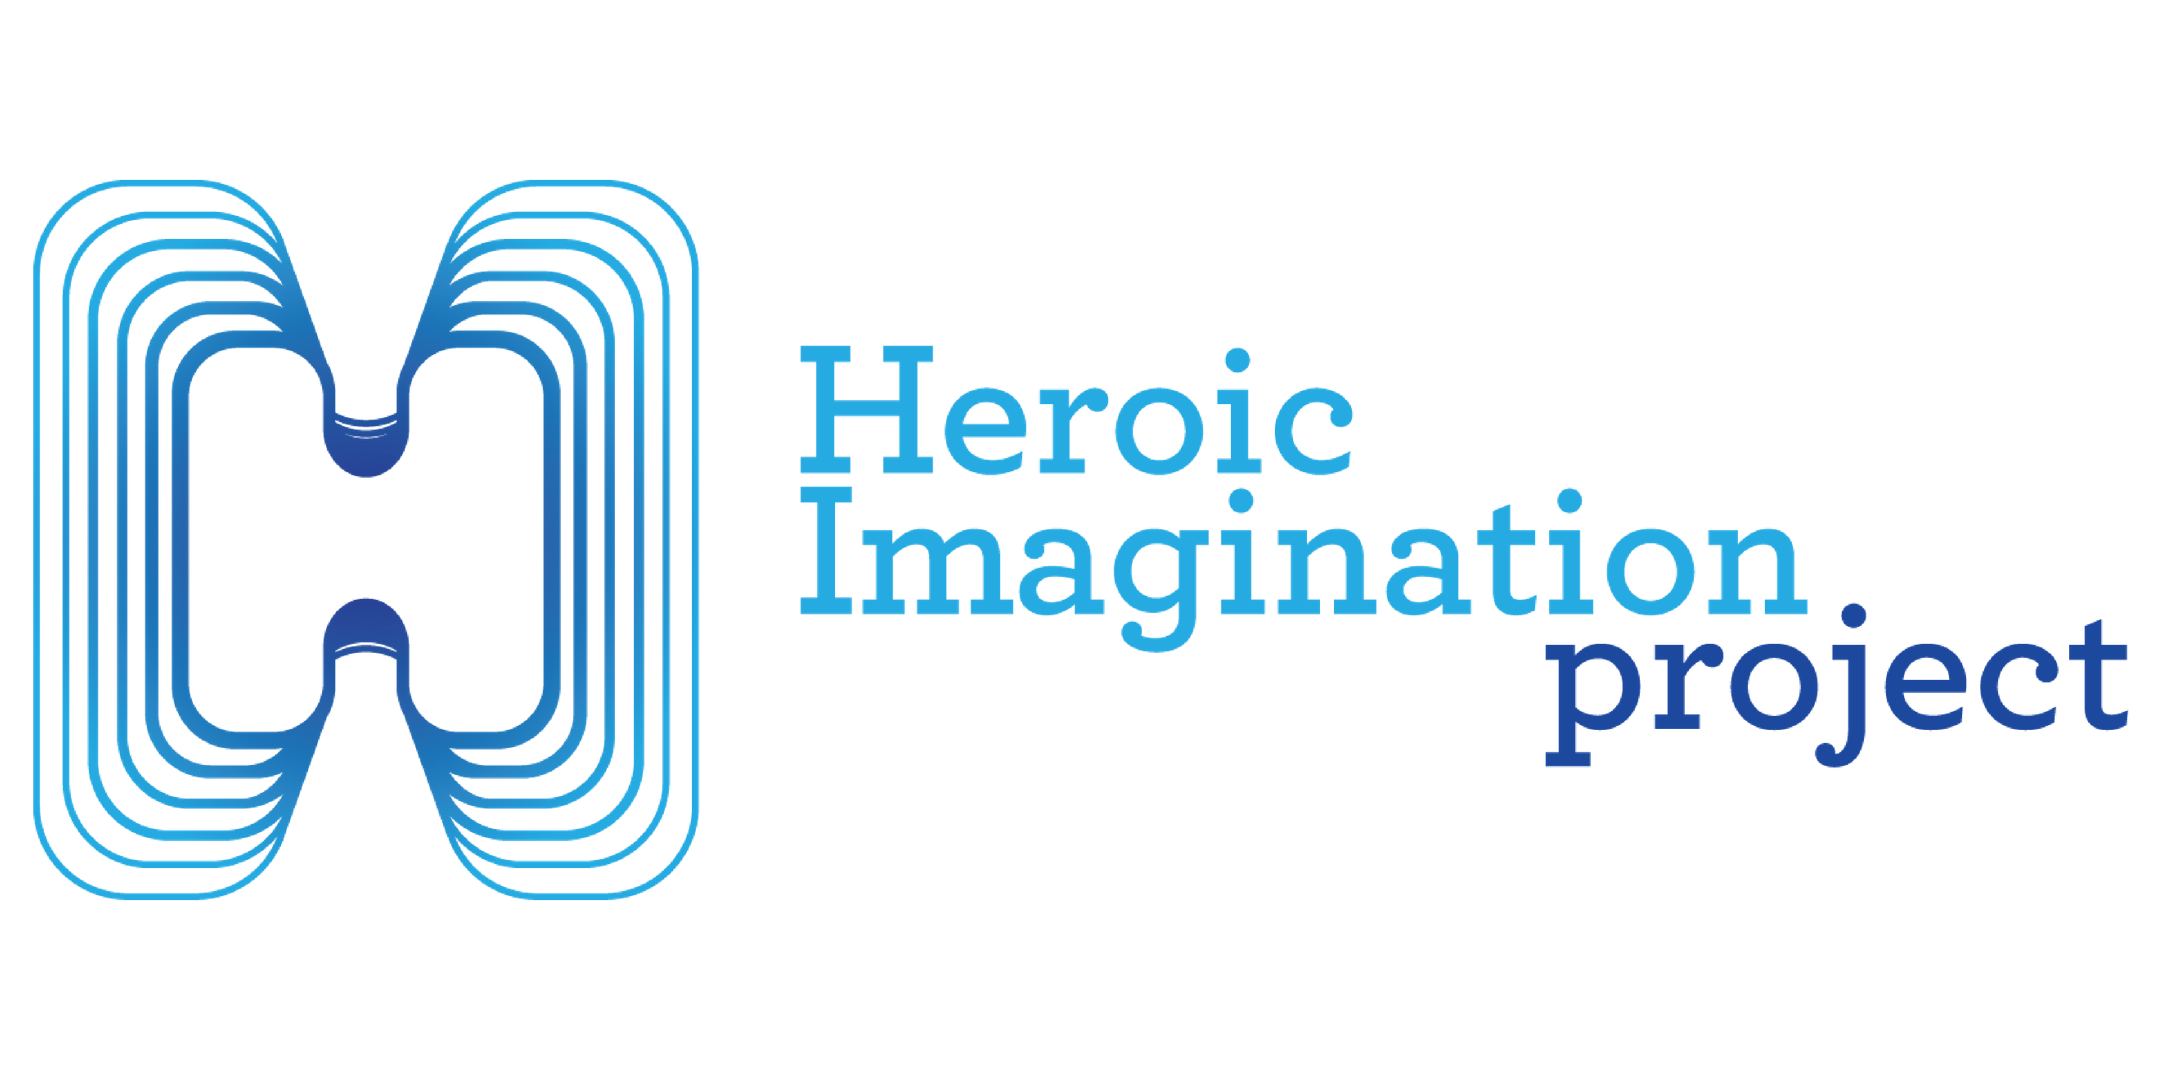 The Heroic Imagination Project